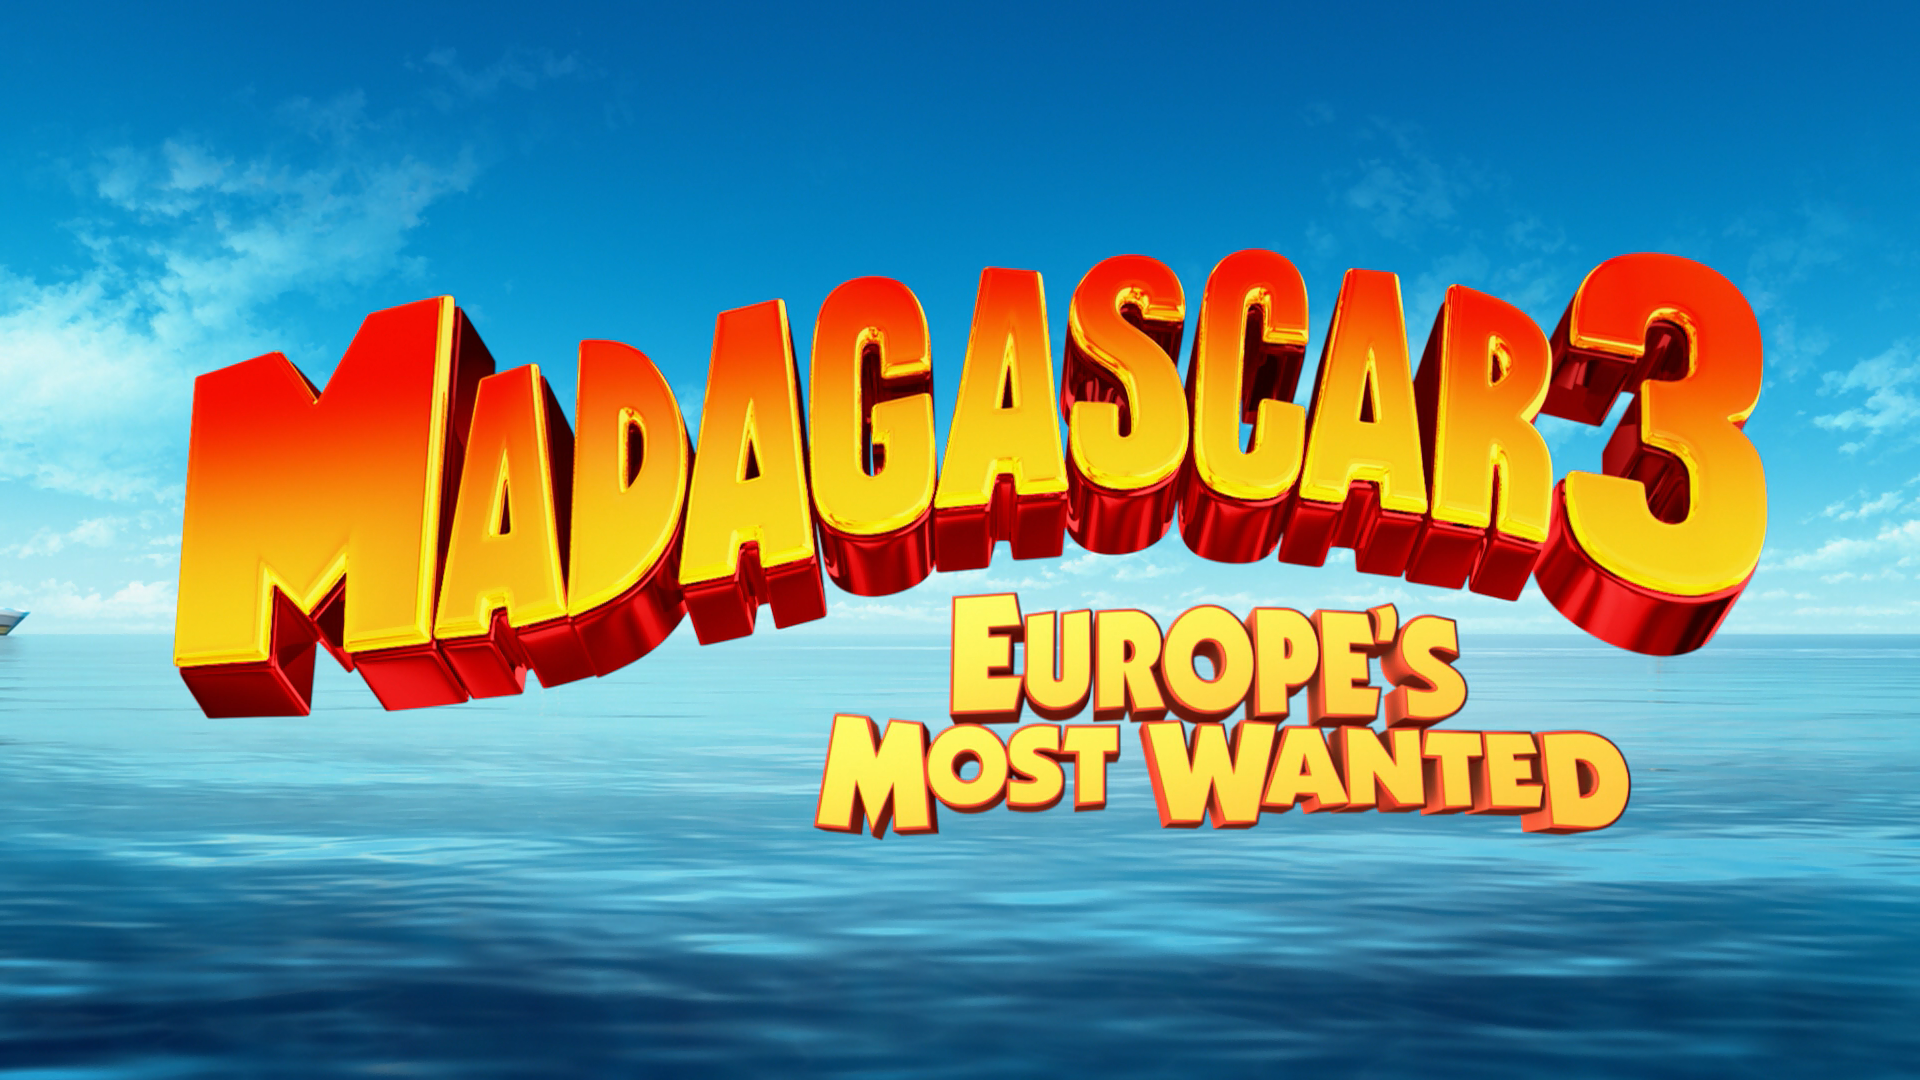 Madagascar 3: Europe's Most Wanted Backgrounds, Compatible - PC, Mobile, Gadgets| 1920x1080 px